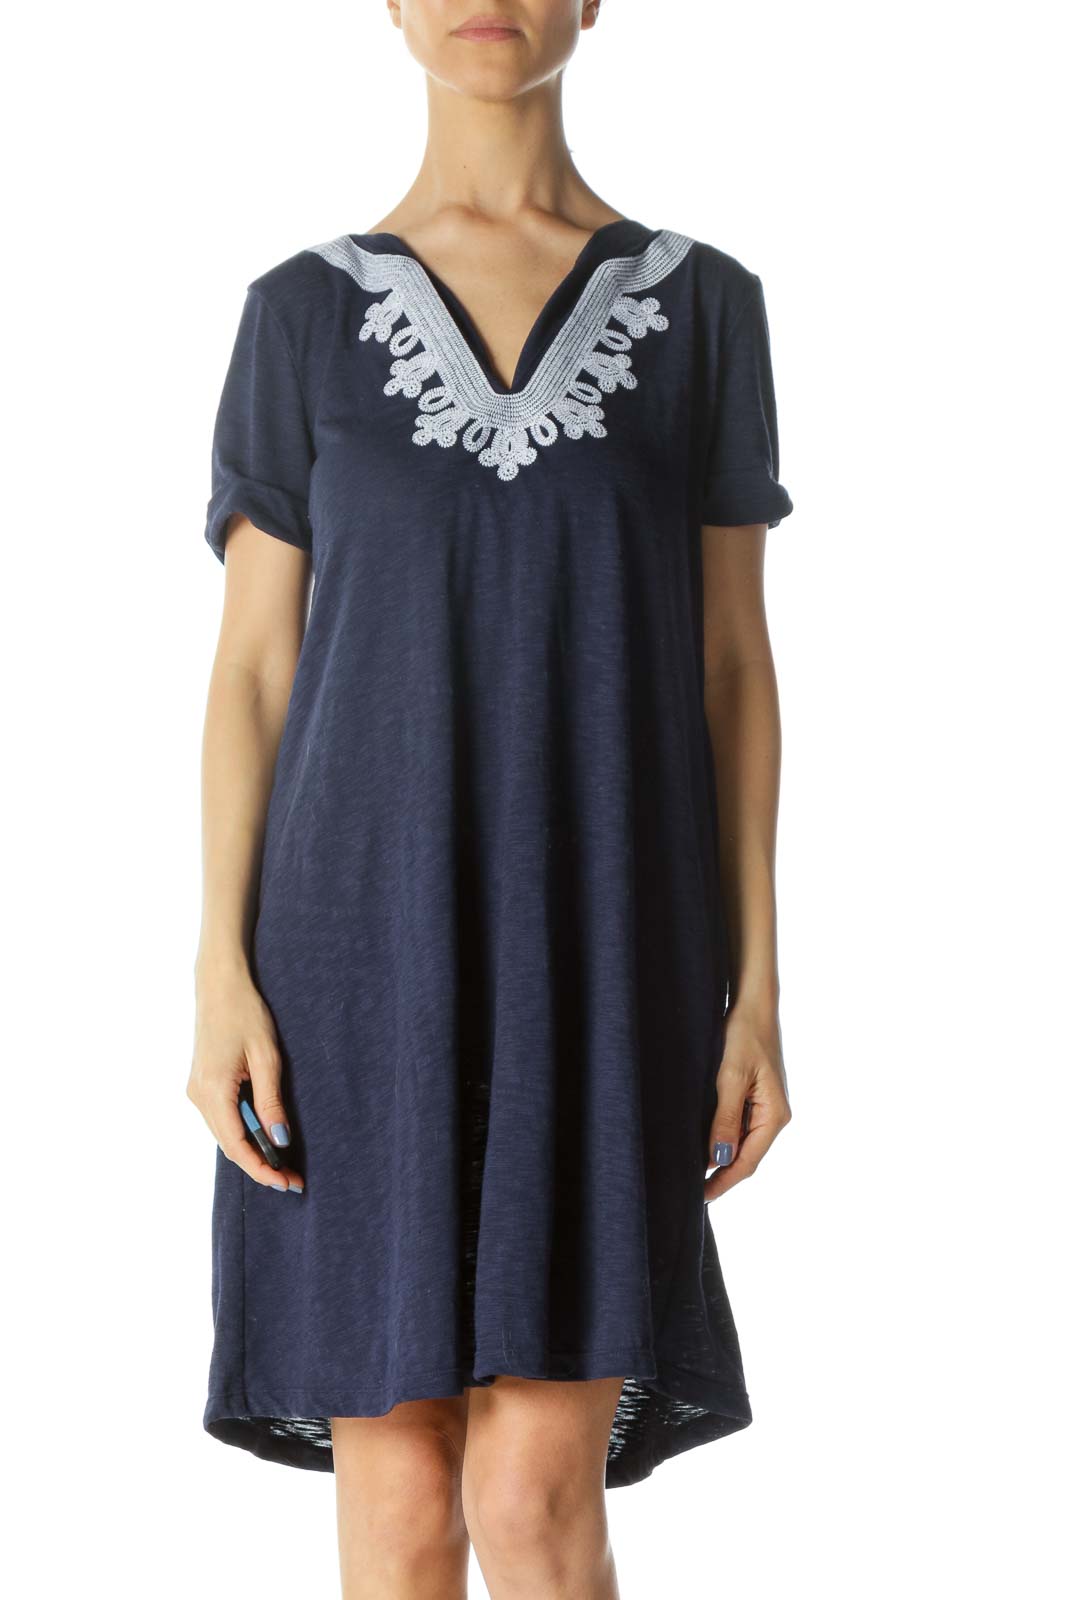 Blue/White Embroidered Short-Sleeve Jersey Day Dress Front